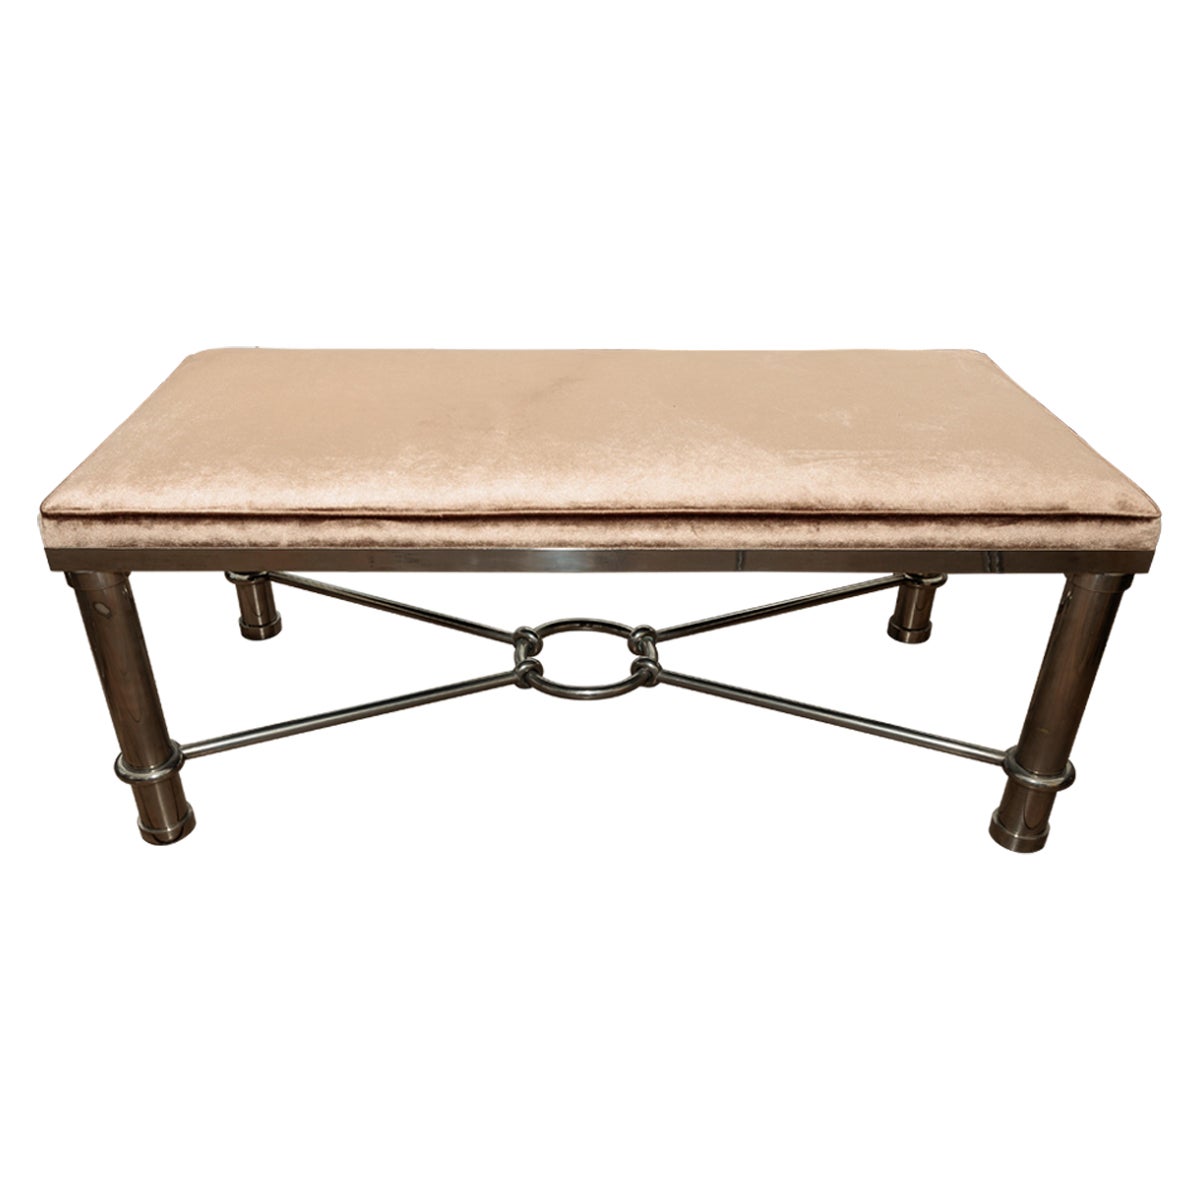 Rectangular Nickel Bench with Stylized Base and Upholstered Seat